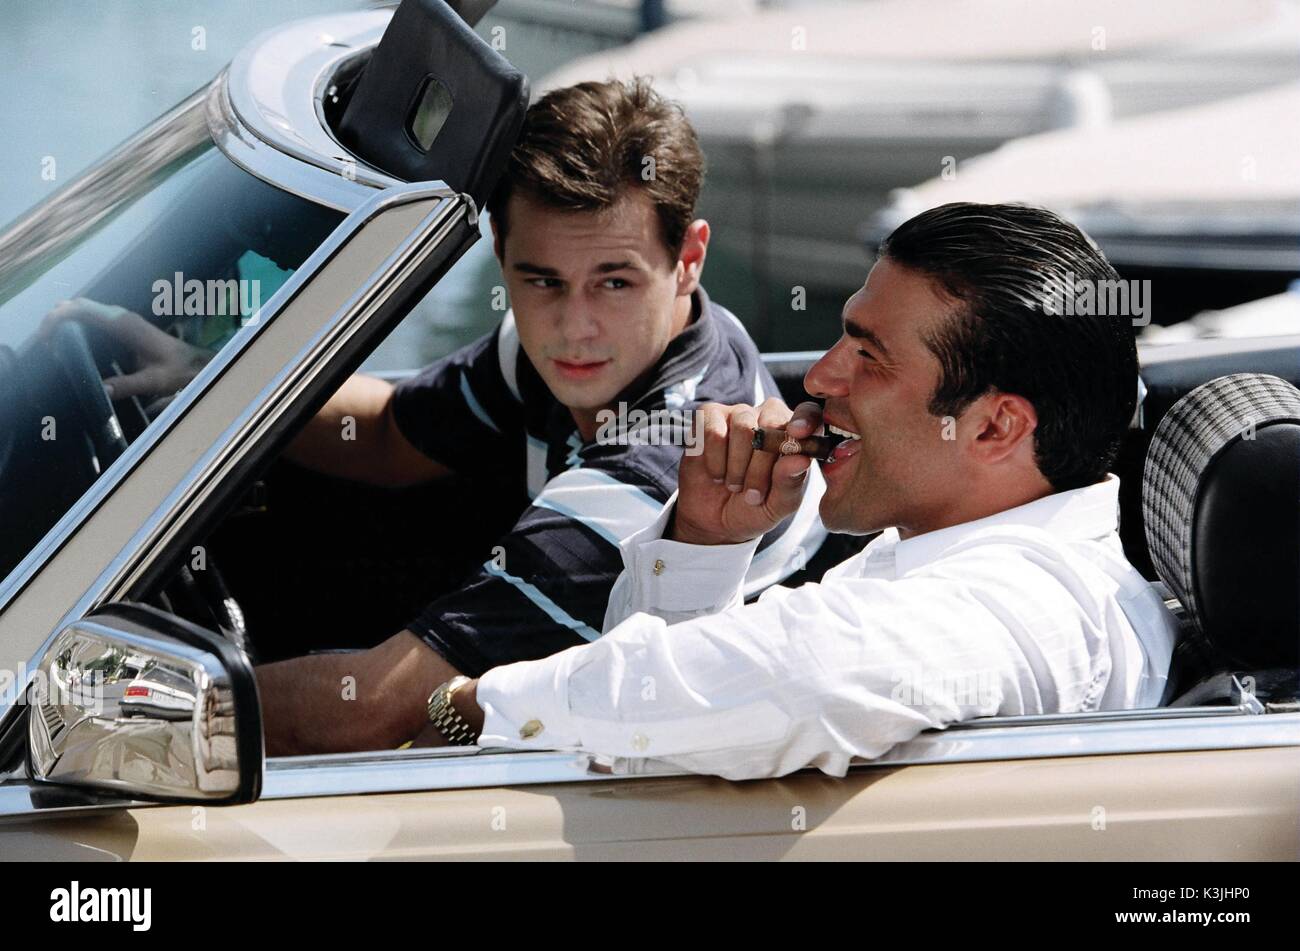 THE BUSINESS Danny Dyer as Frankie, Tamer Hassan as Charlie     Date: 2005 Stock Photo